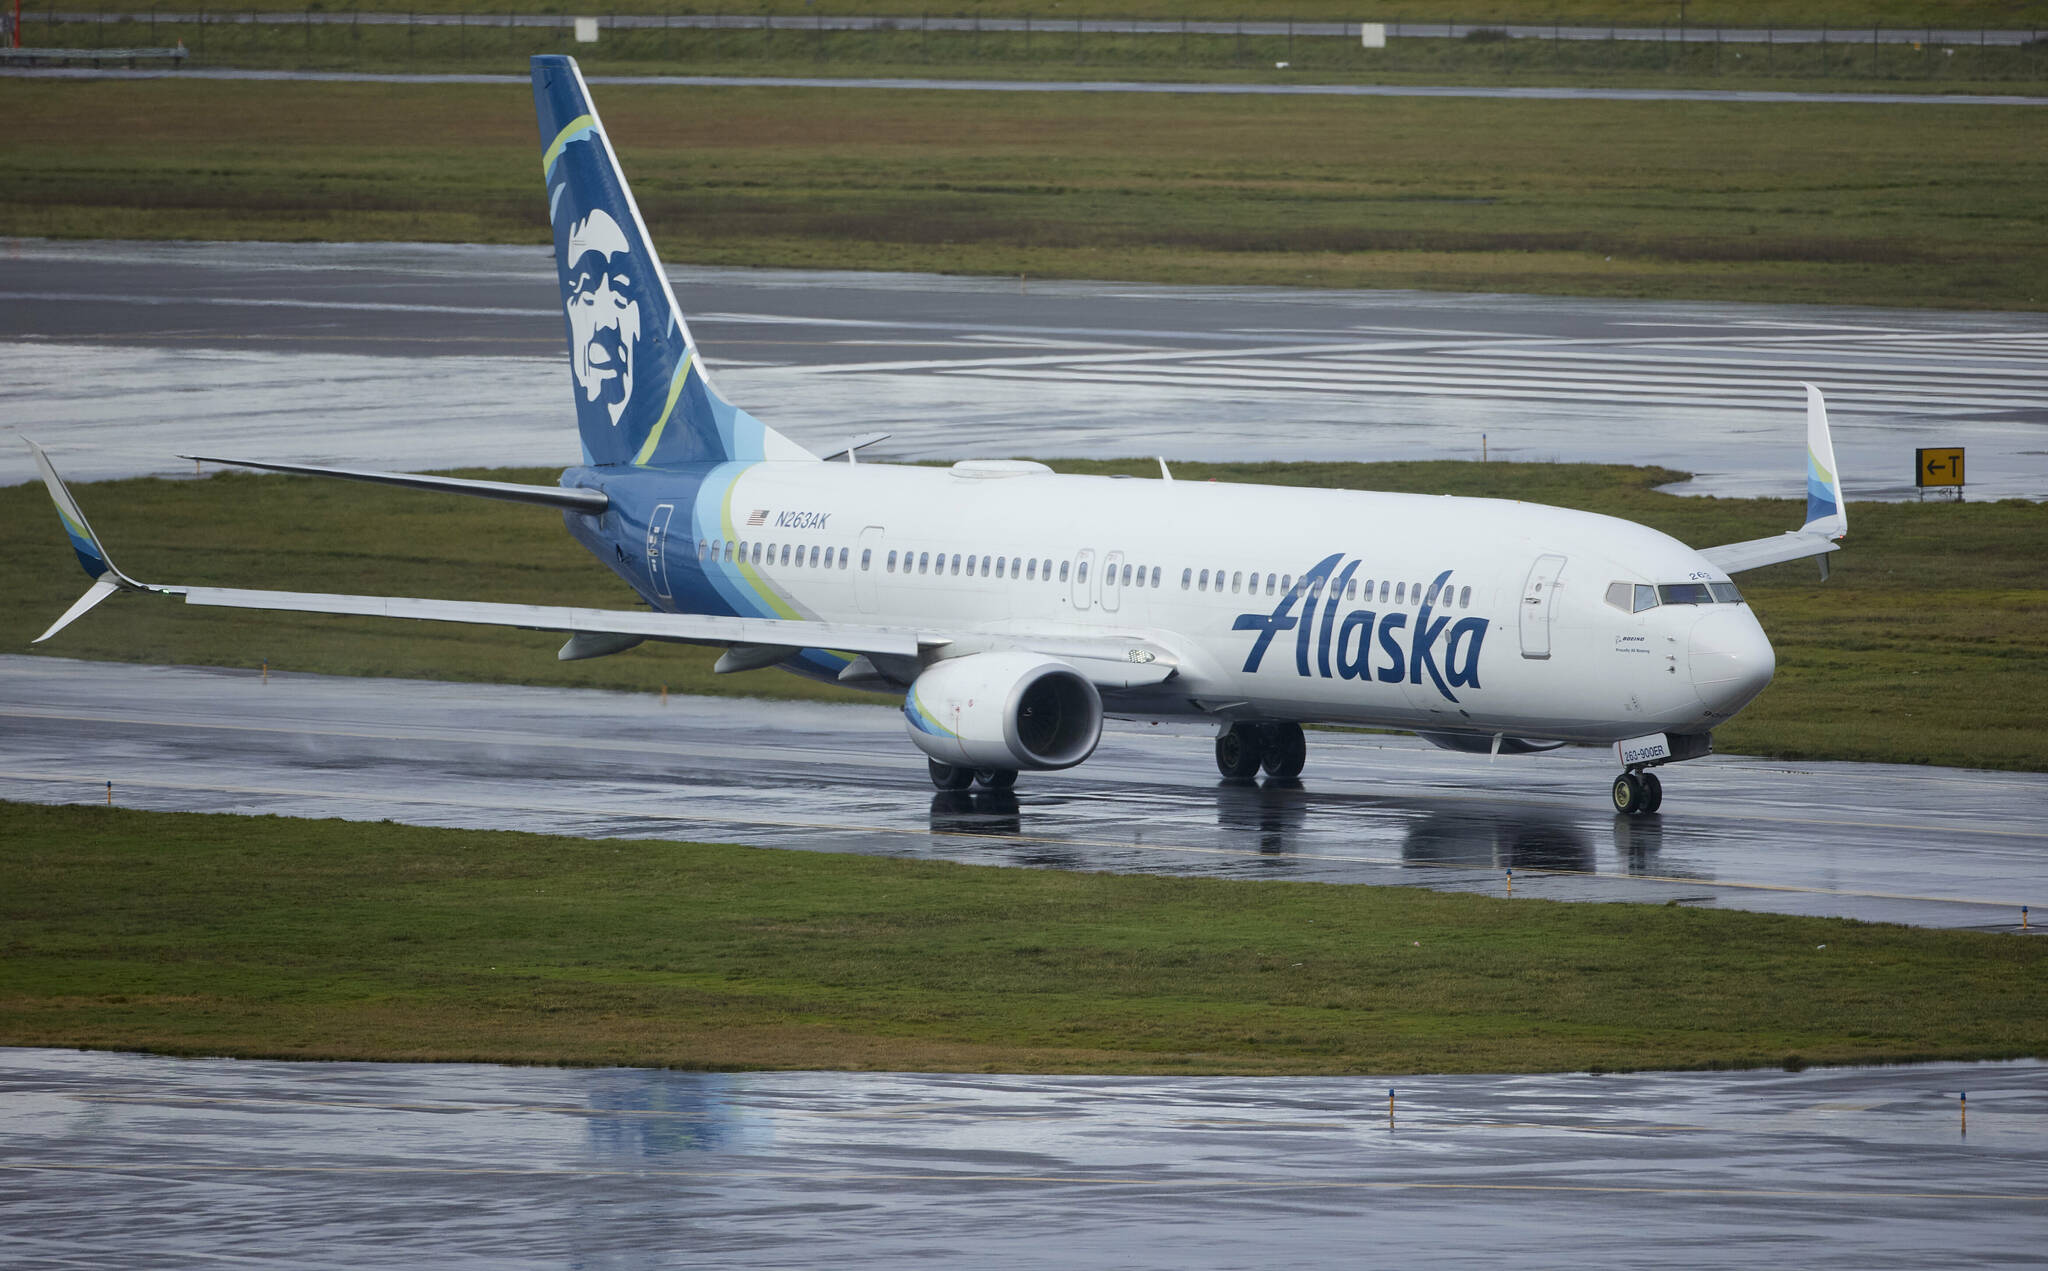 Alaska Airlines flight 1276, a Boeing 737-900, taxis before takeoff from Portland International Airport in Portland, Ore., on Saturday. The FAA has ordered the temporary grounding of Boeing 737 MAX 9 aircraft after part of the fuselage blew out during a flight. (AP Photo/Craig Mitchelldyer)